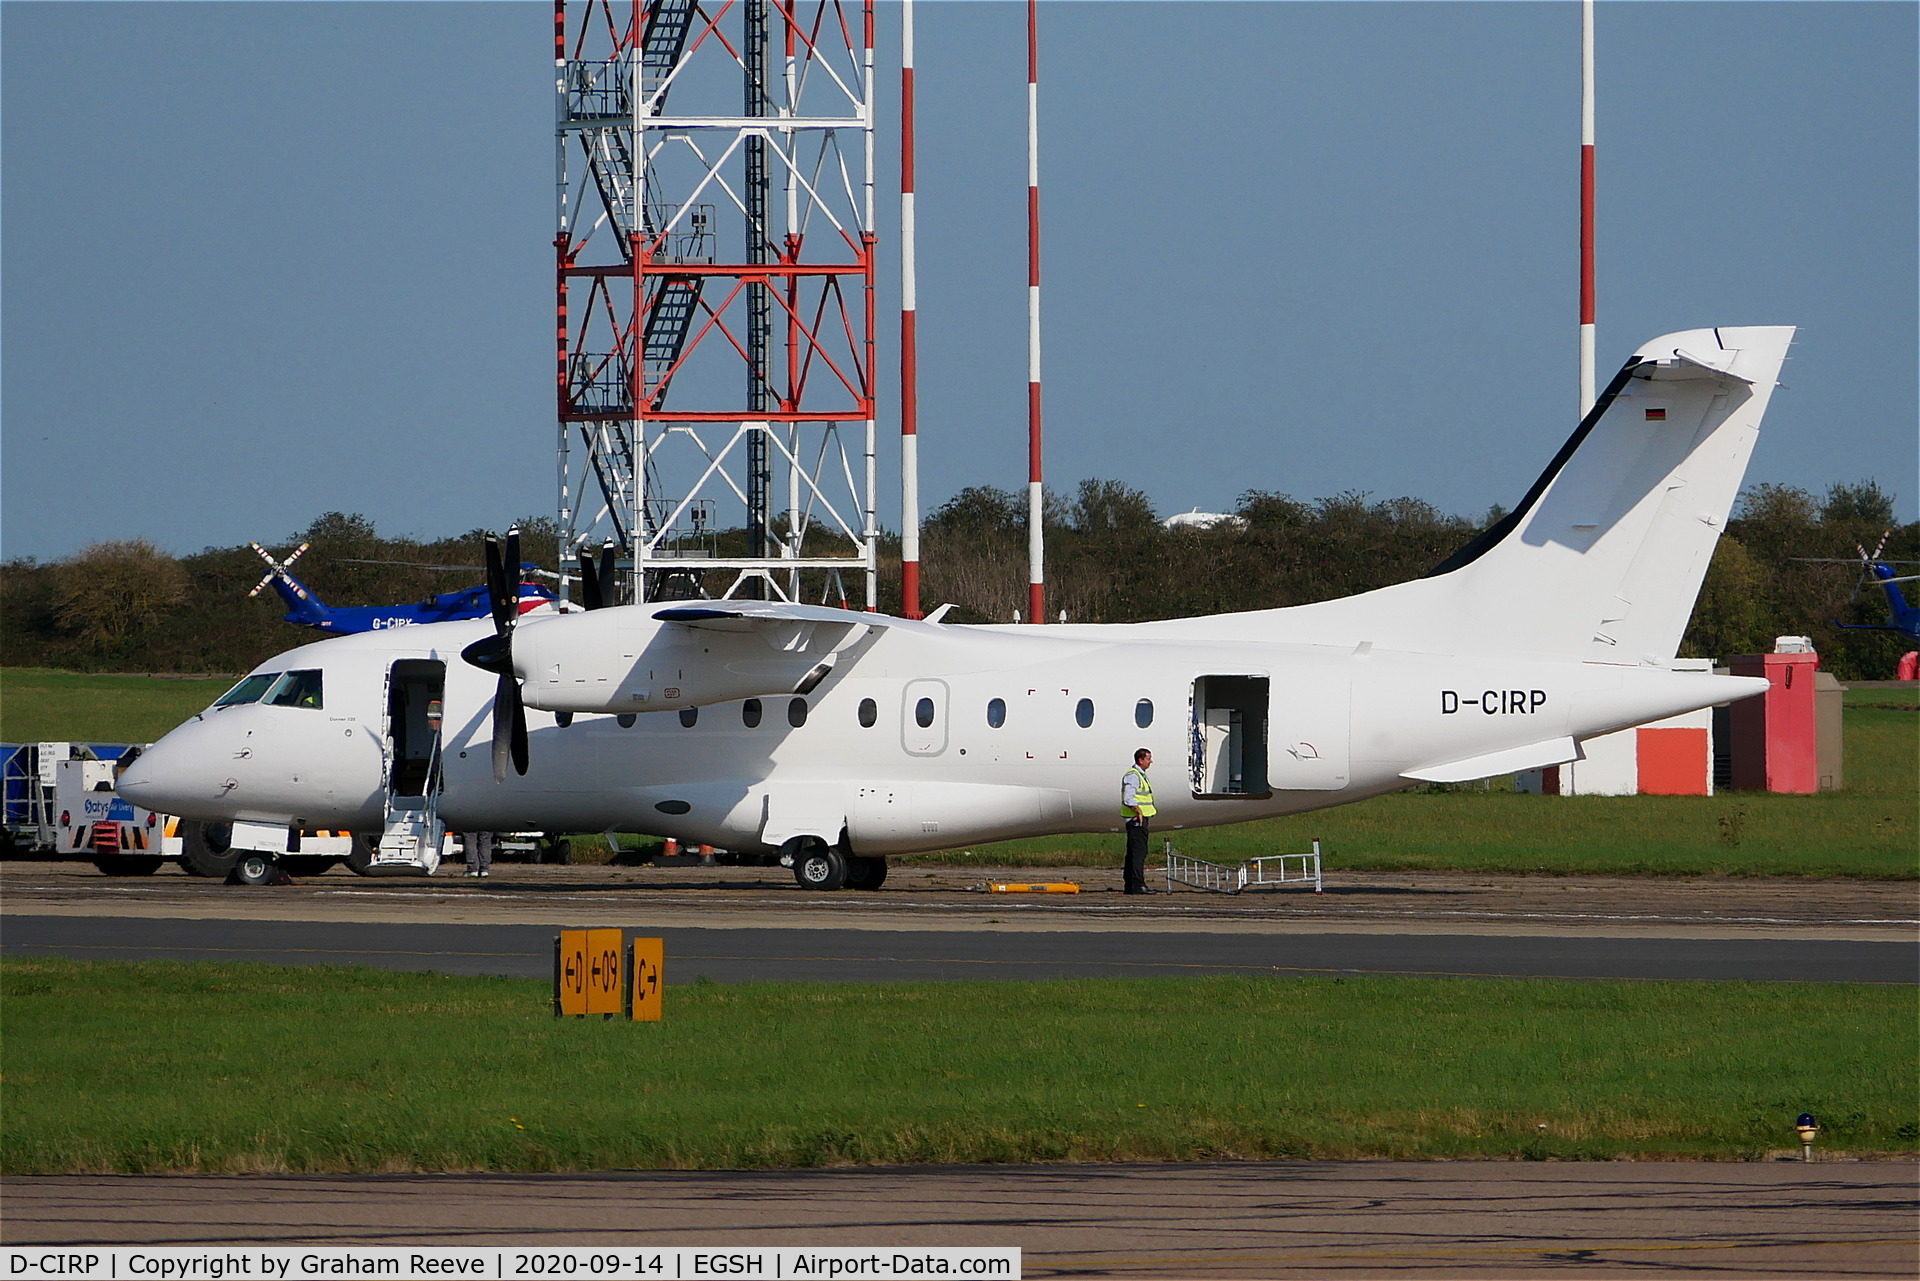 D-CIRP, 1993 Dornier 328-100 C/N 3006, Parked at Norwich, after a re-spray.